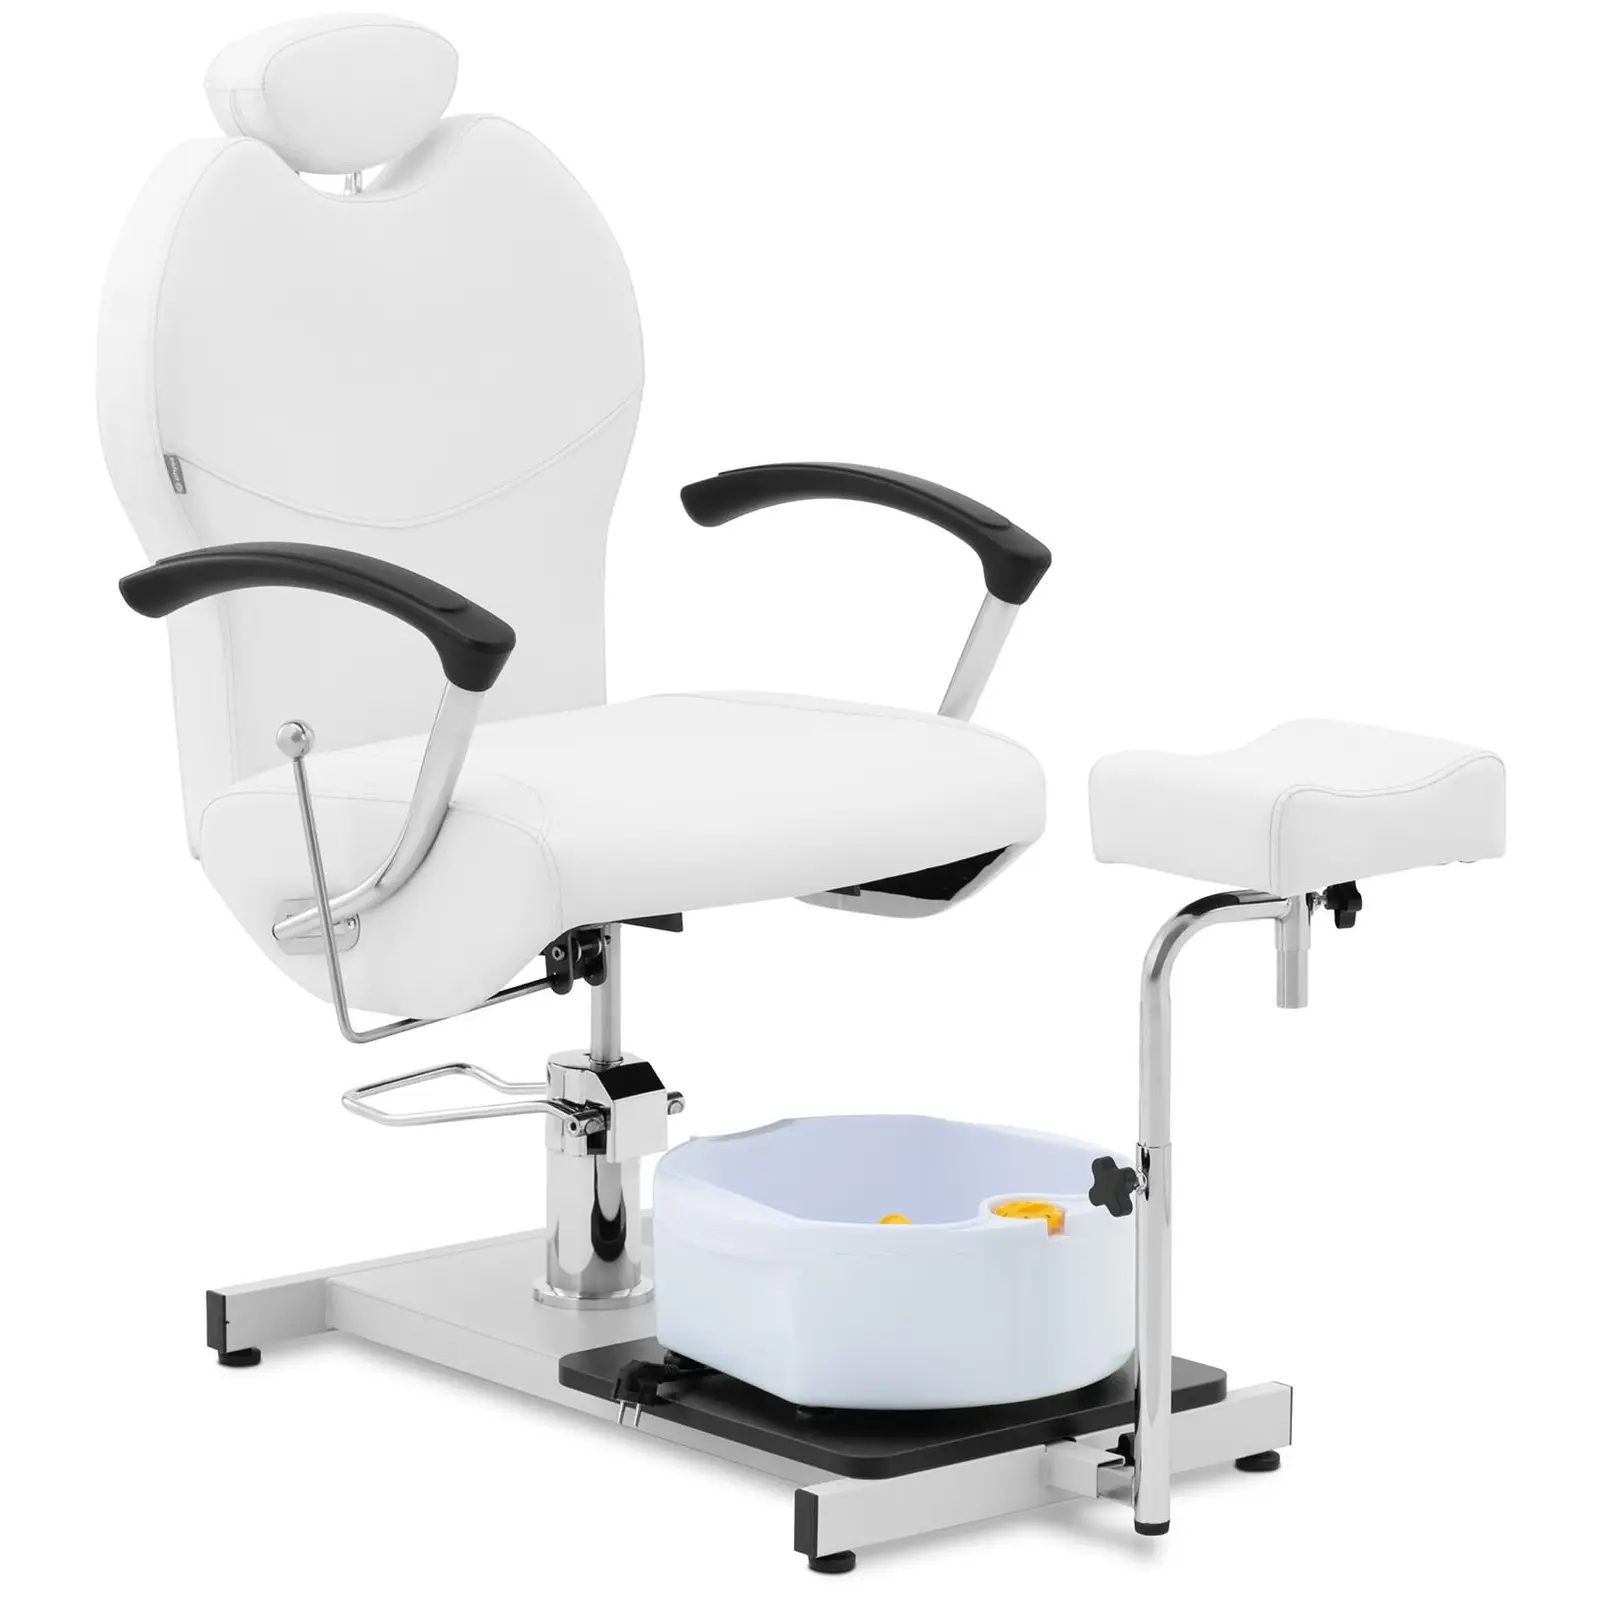 Pedicure Chair - with a leg rest and foot bath